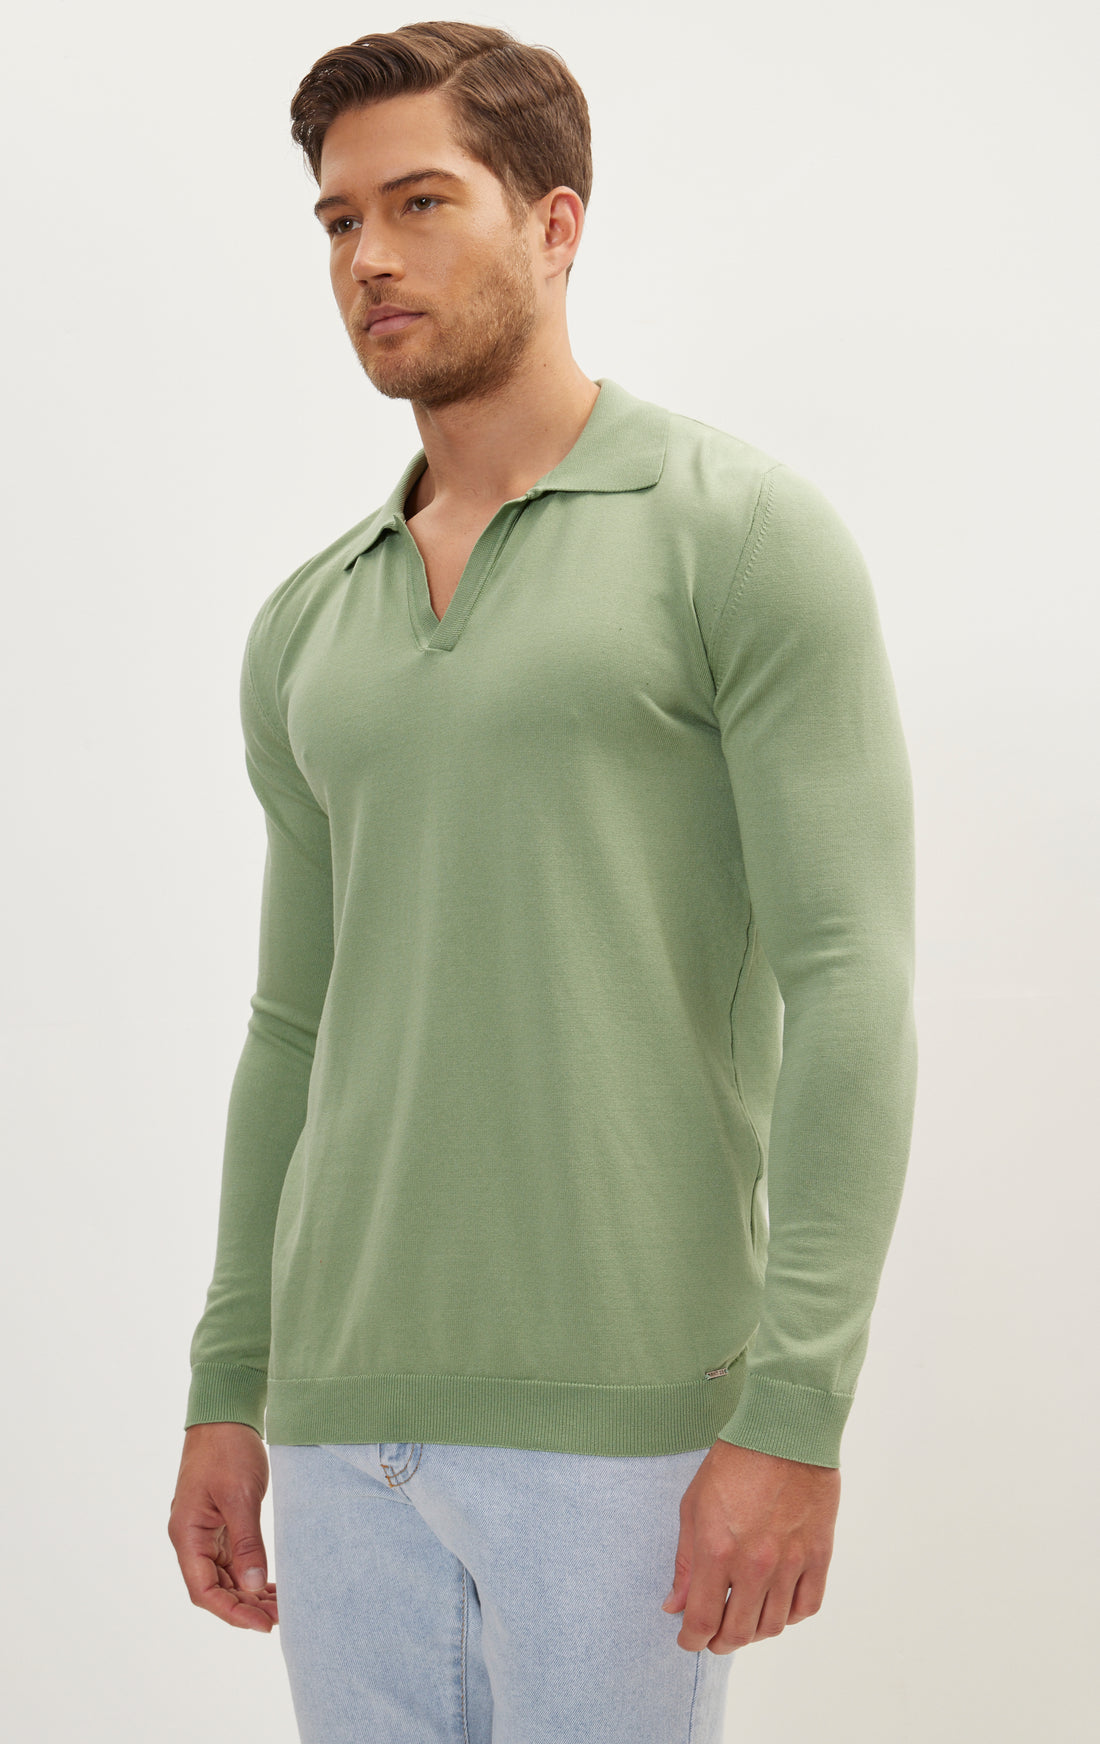 Johnny-Collar Sweater Polo - Teal Green